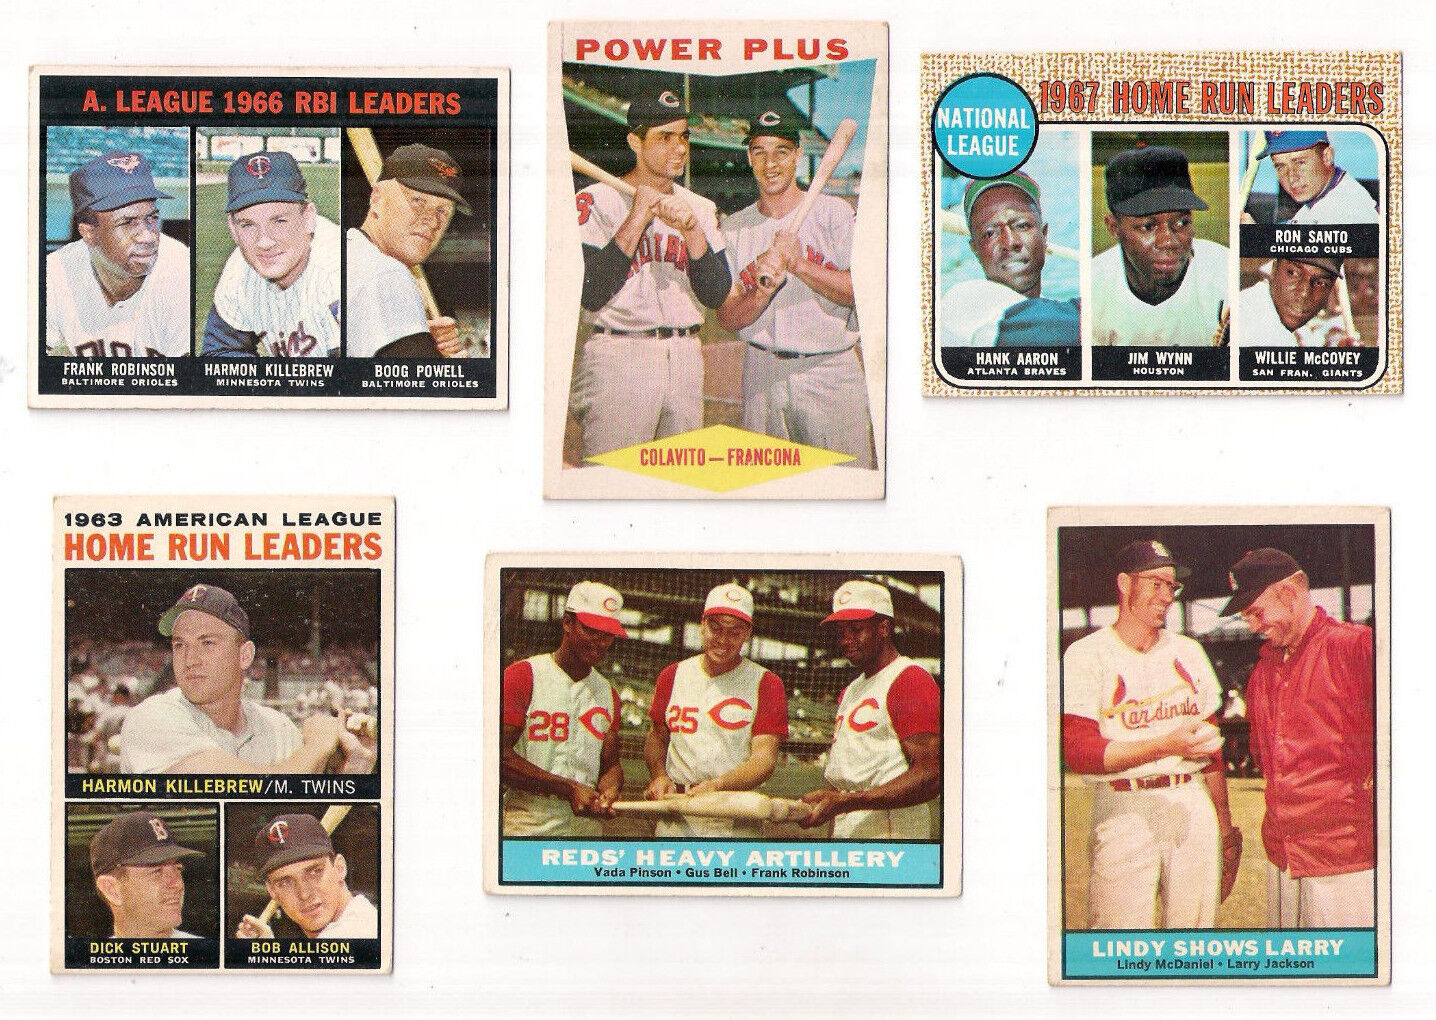 1961 TOPPS CARDINALS LINDY SHOWS LARRY  CARD #75